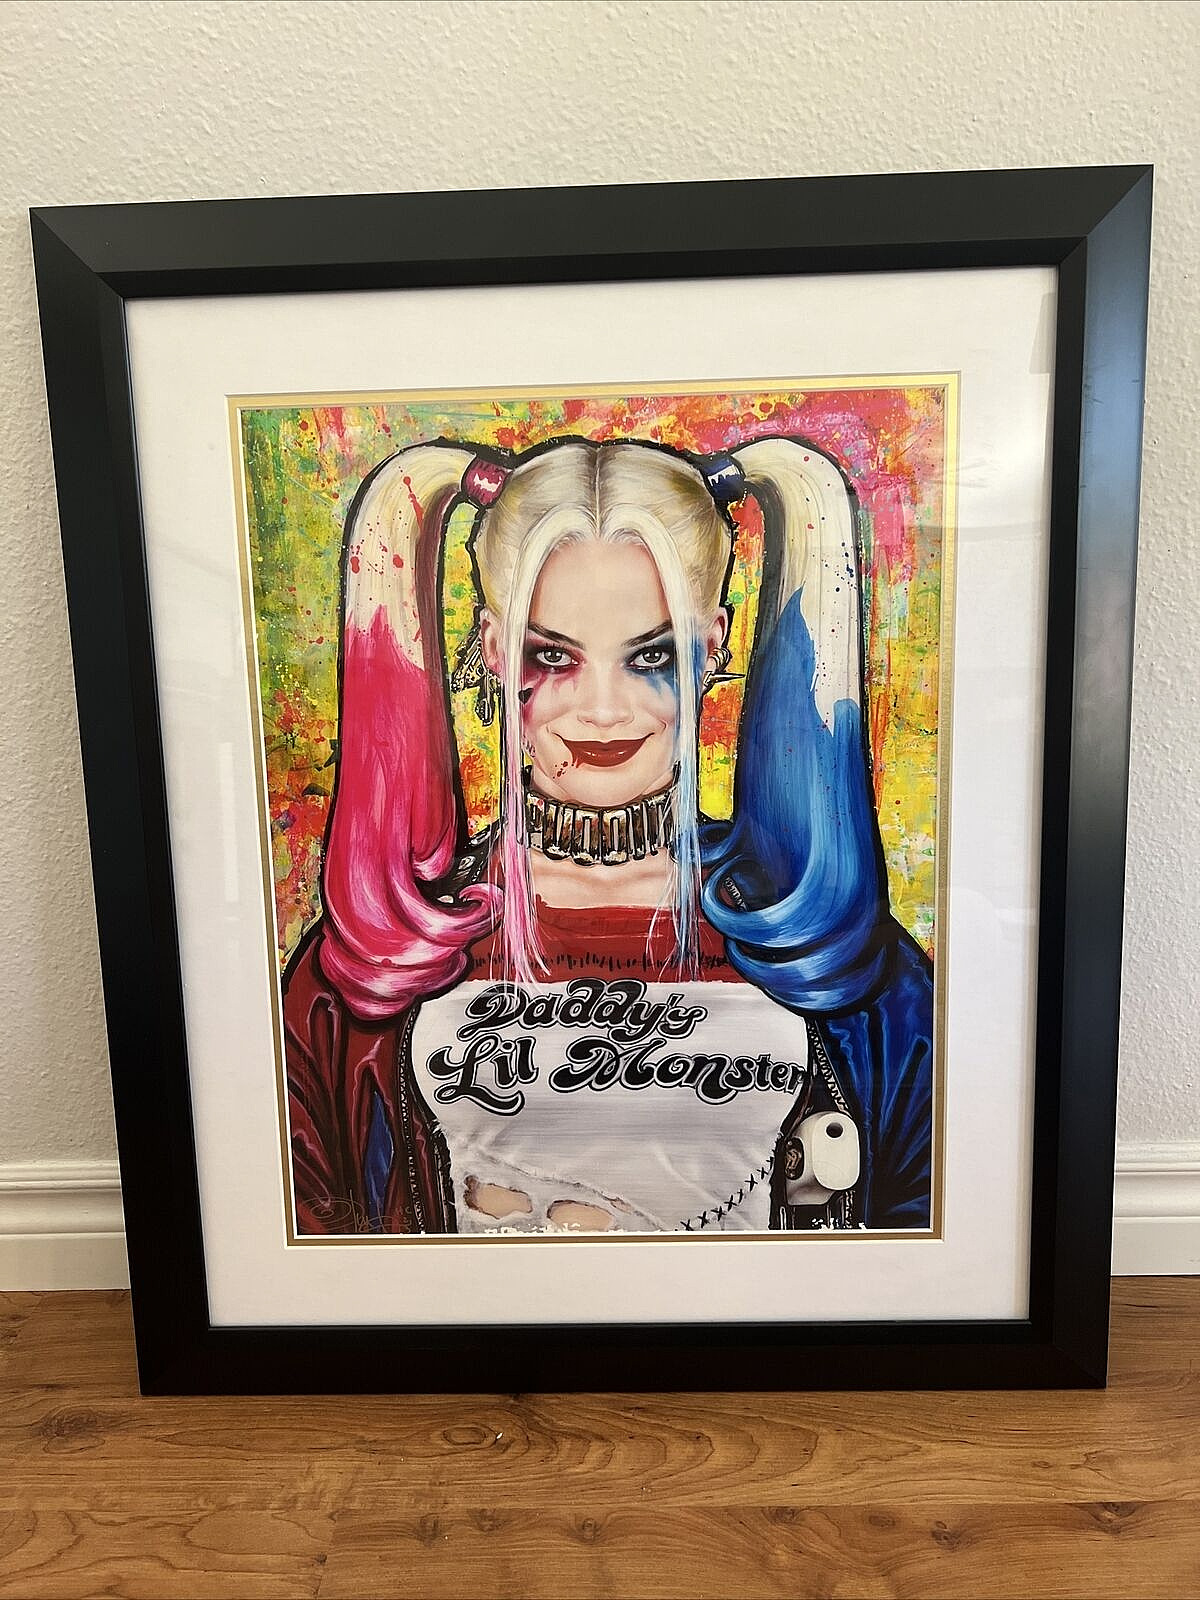 Sideshow Harley Quinn Print limited edition number 23 of 400 non diamond dust